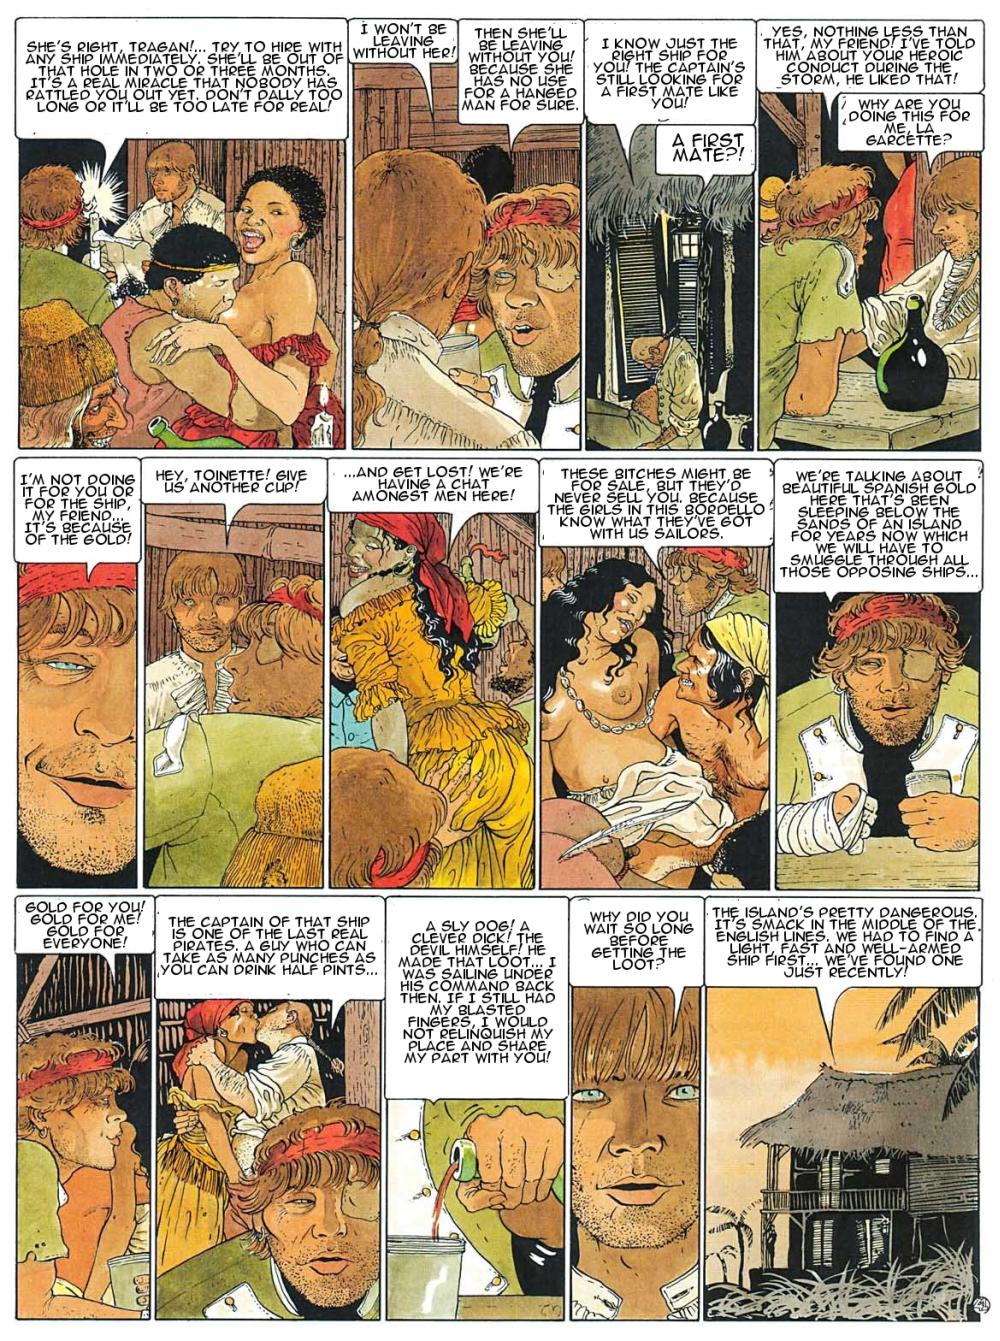 Read online The passengers of the wind comic -  Issue #5 - 43